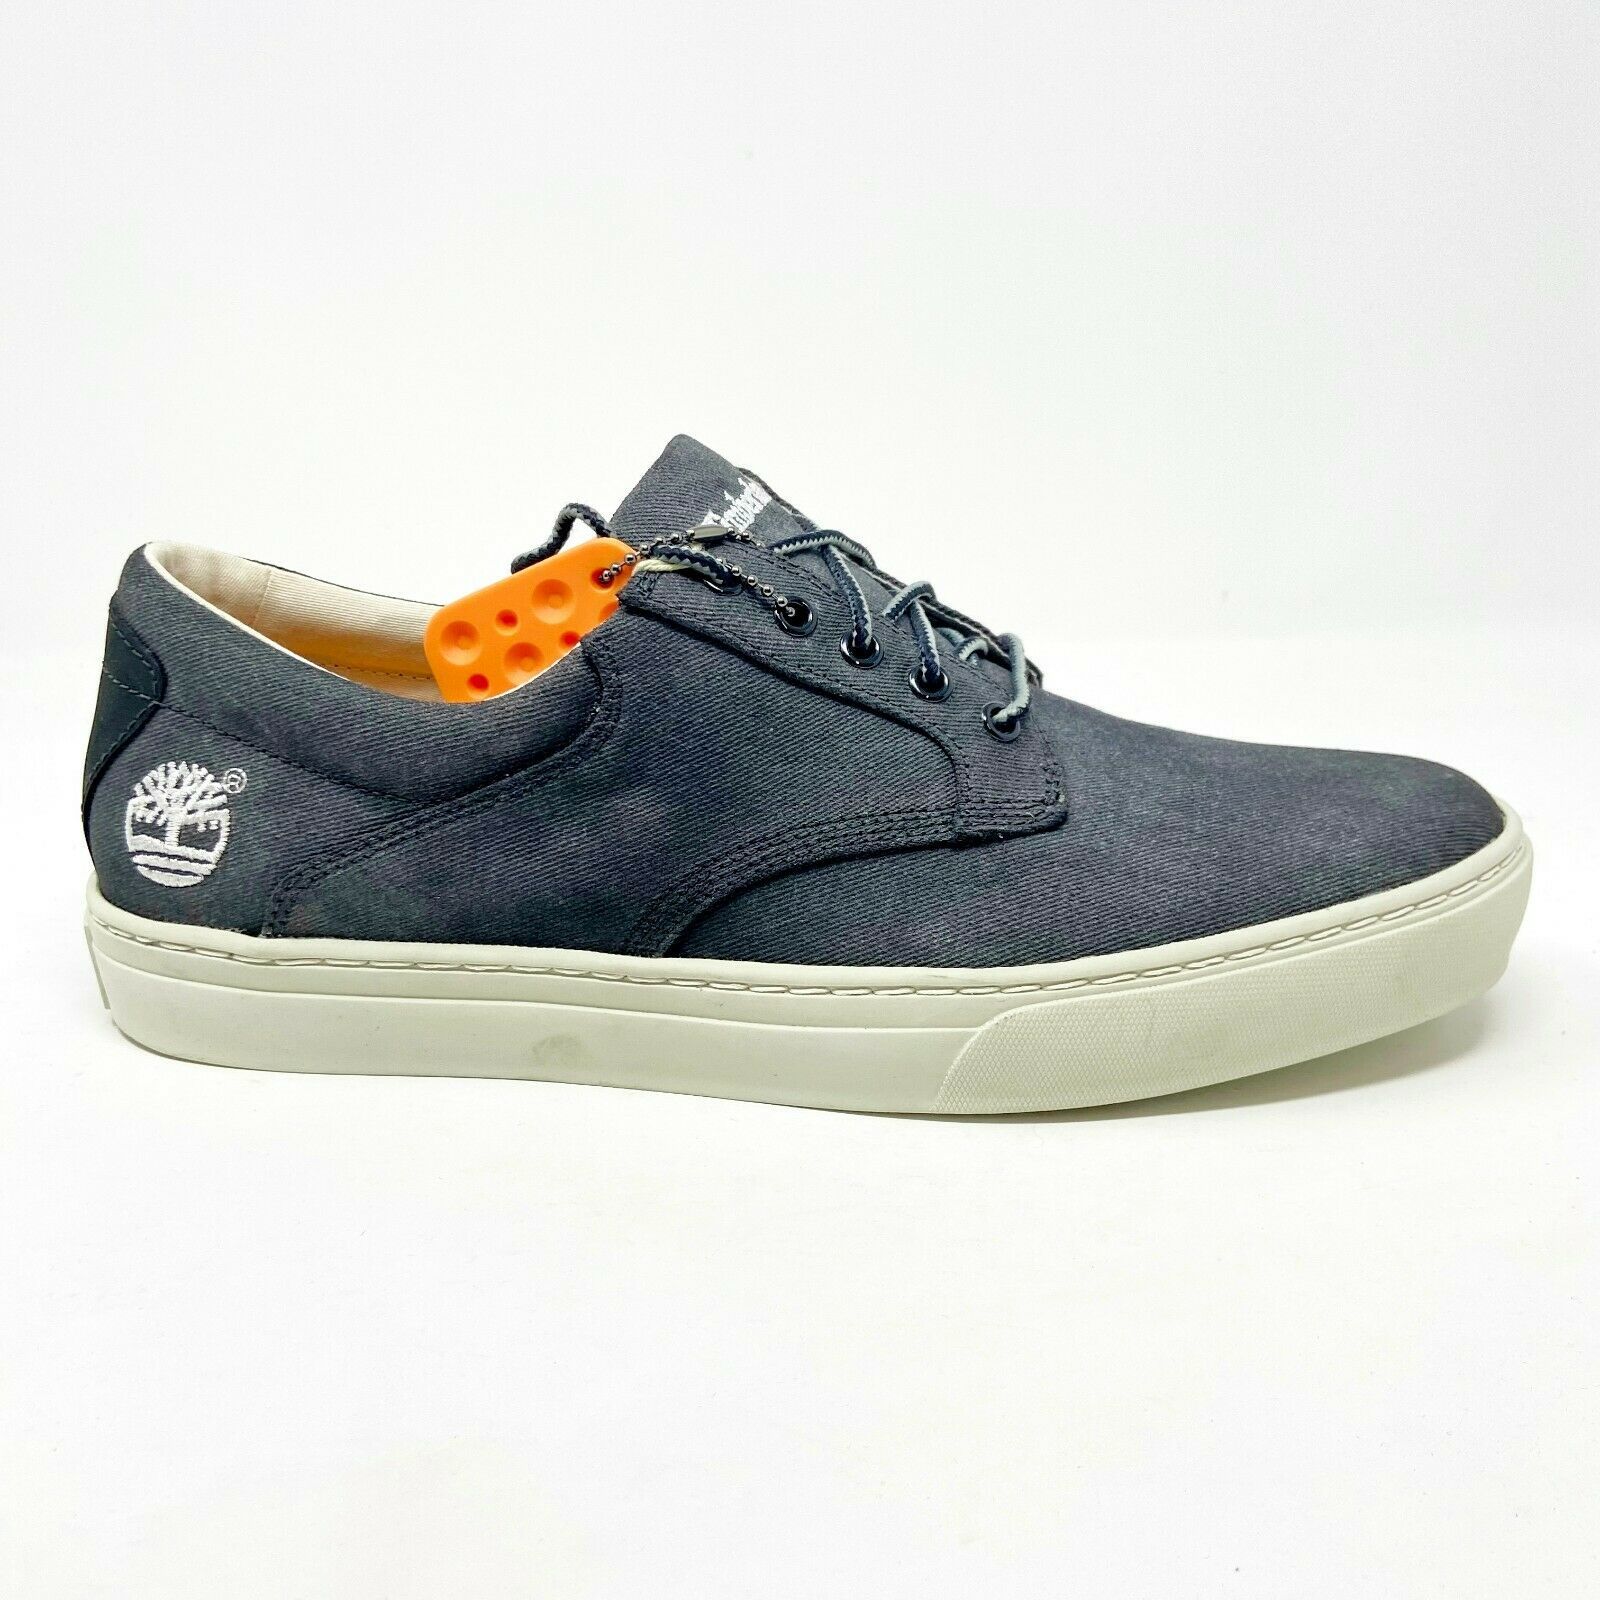 Timberland Earthkeepers EK Cup Ox Black and 33 similar items